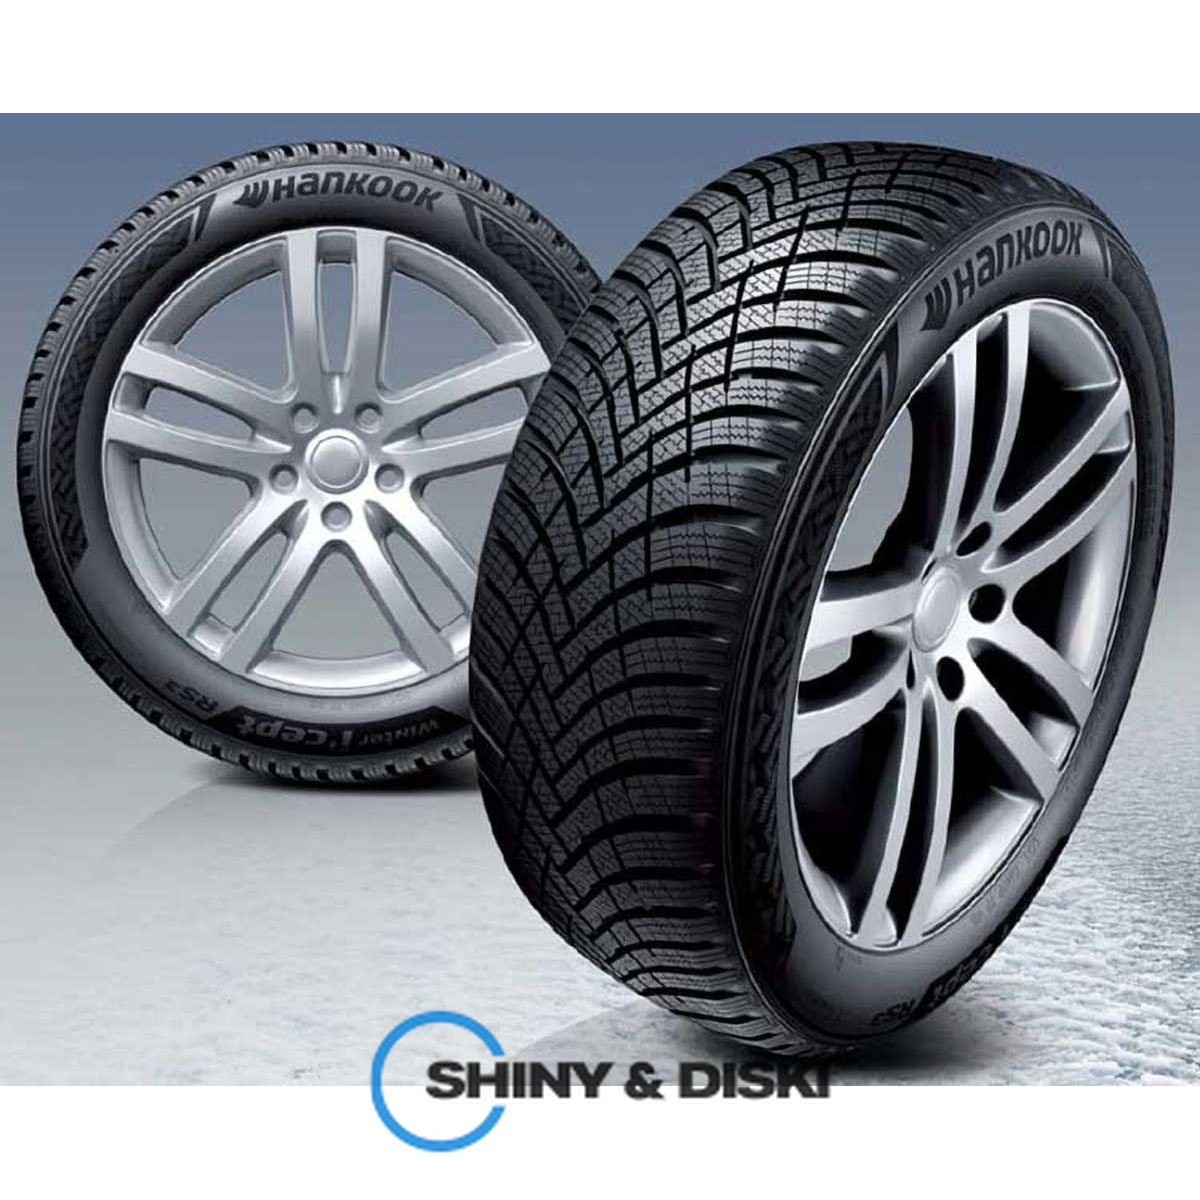 покрышки hankook winter i*cept rs3 w462 195/55 r15 85h